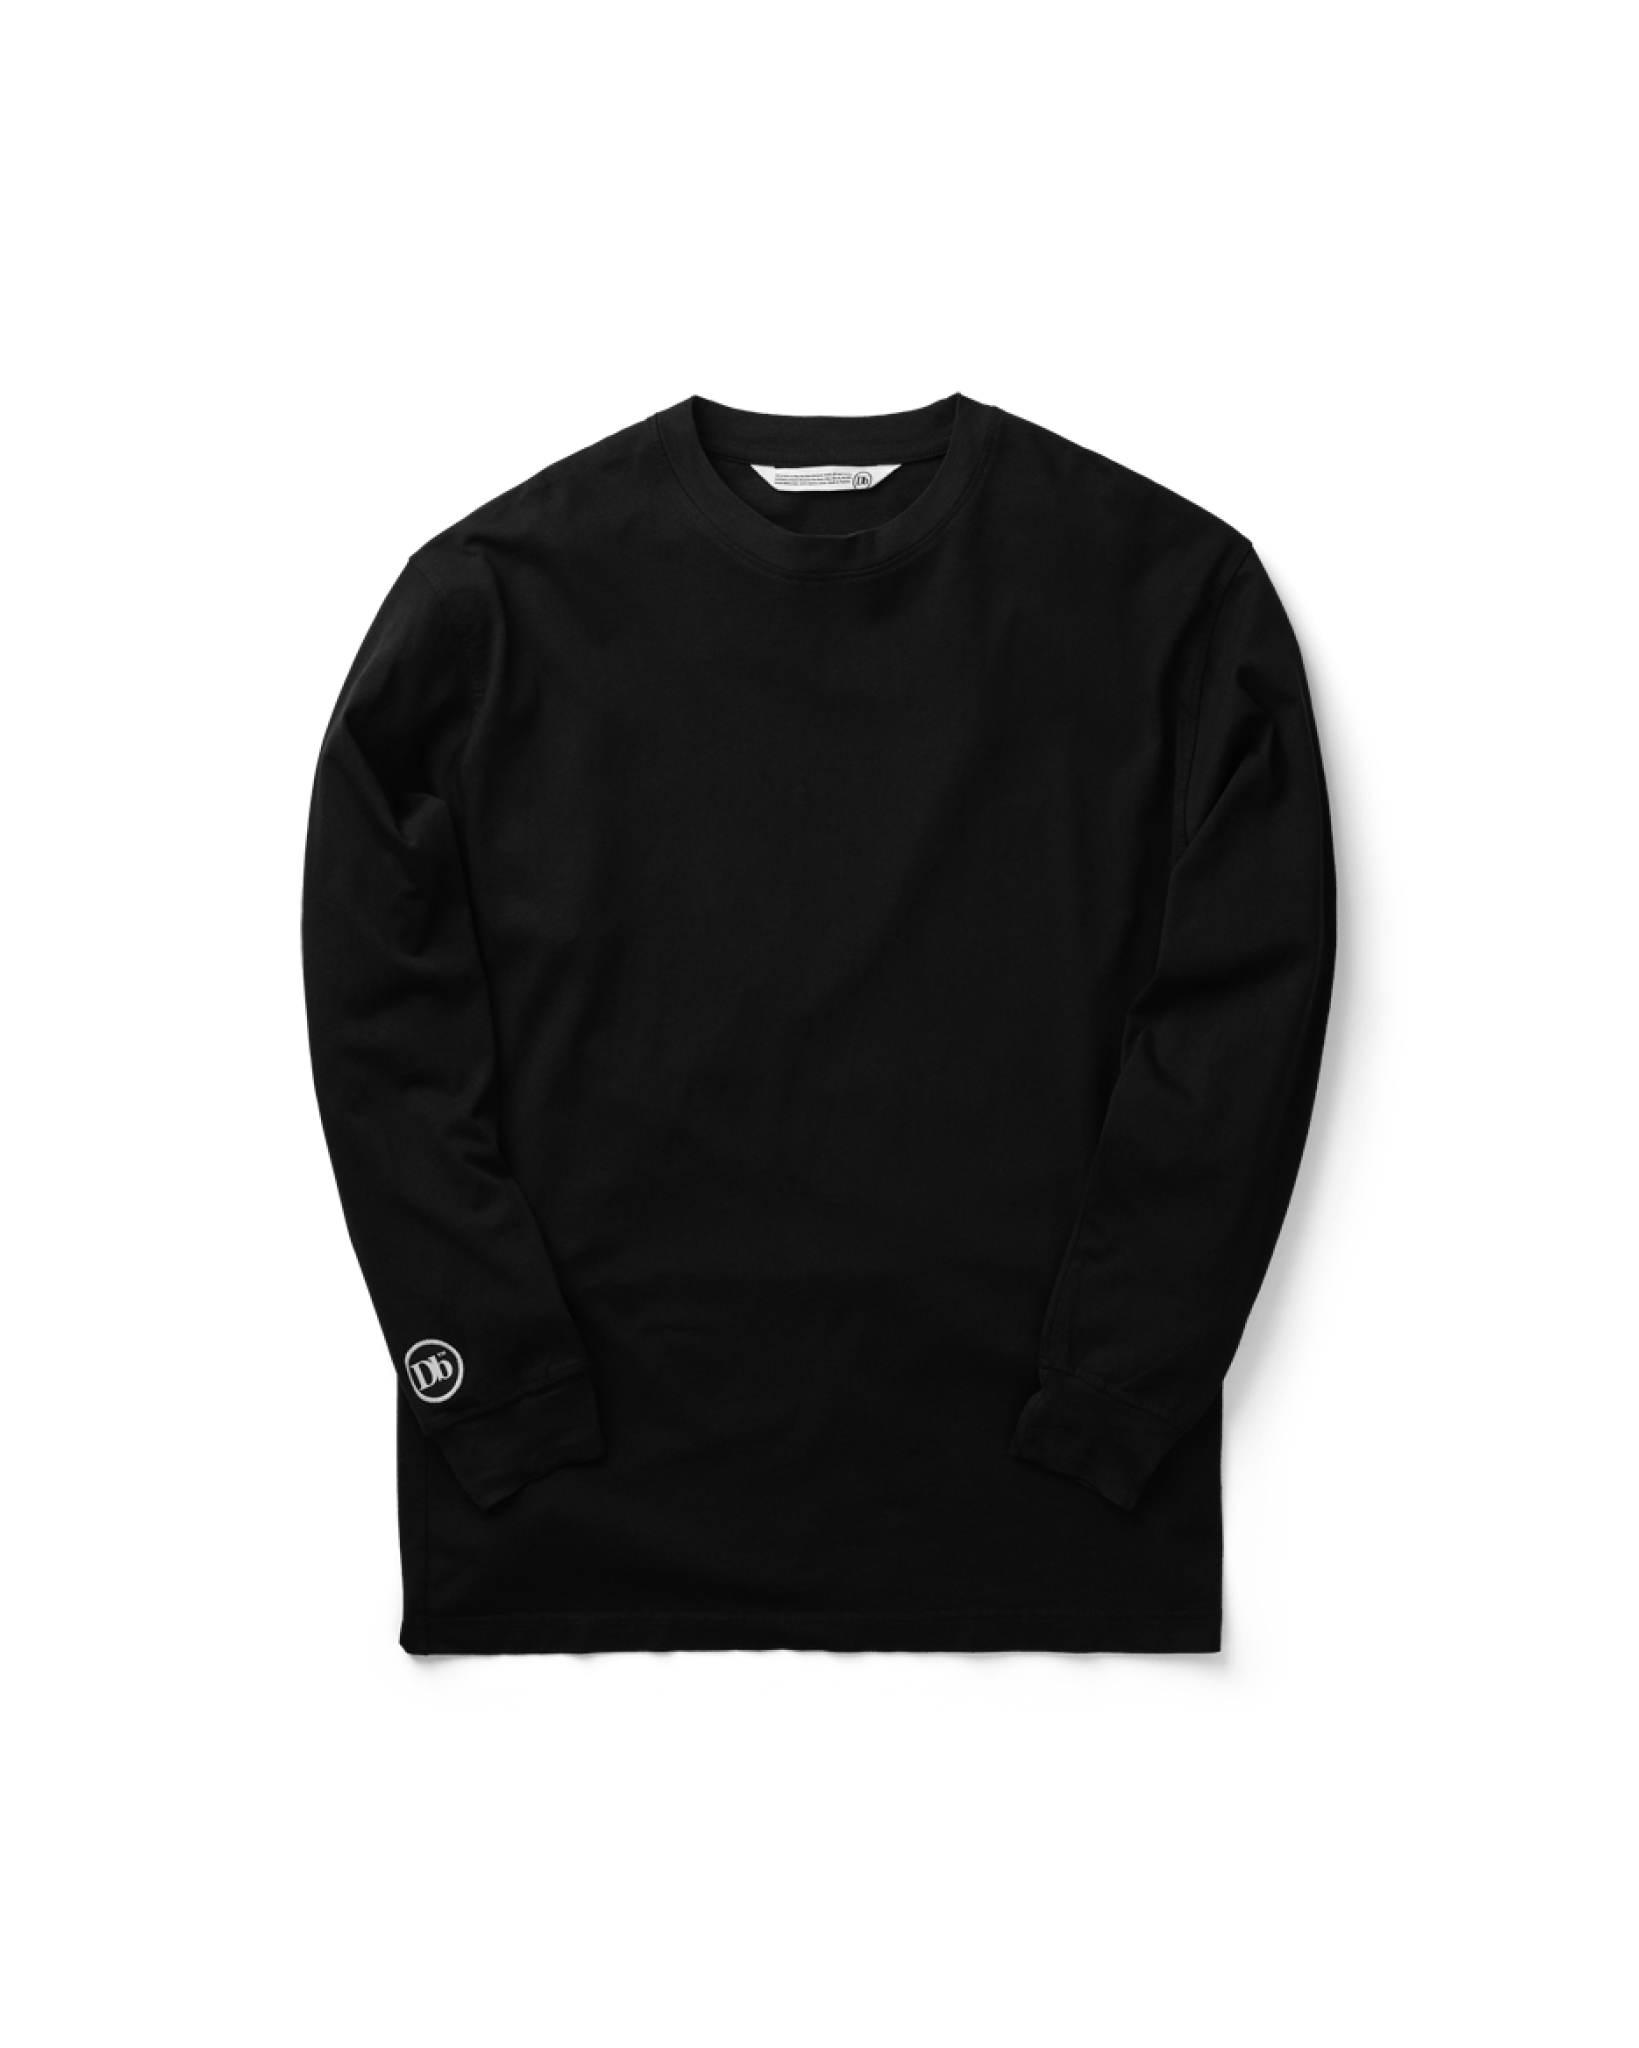 Anywear Long Sleeve Black Out - XS